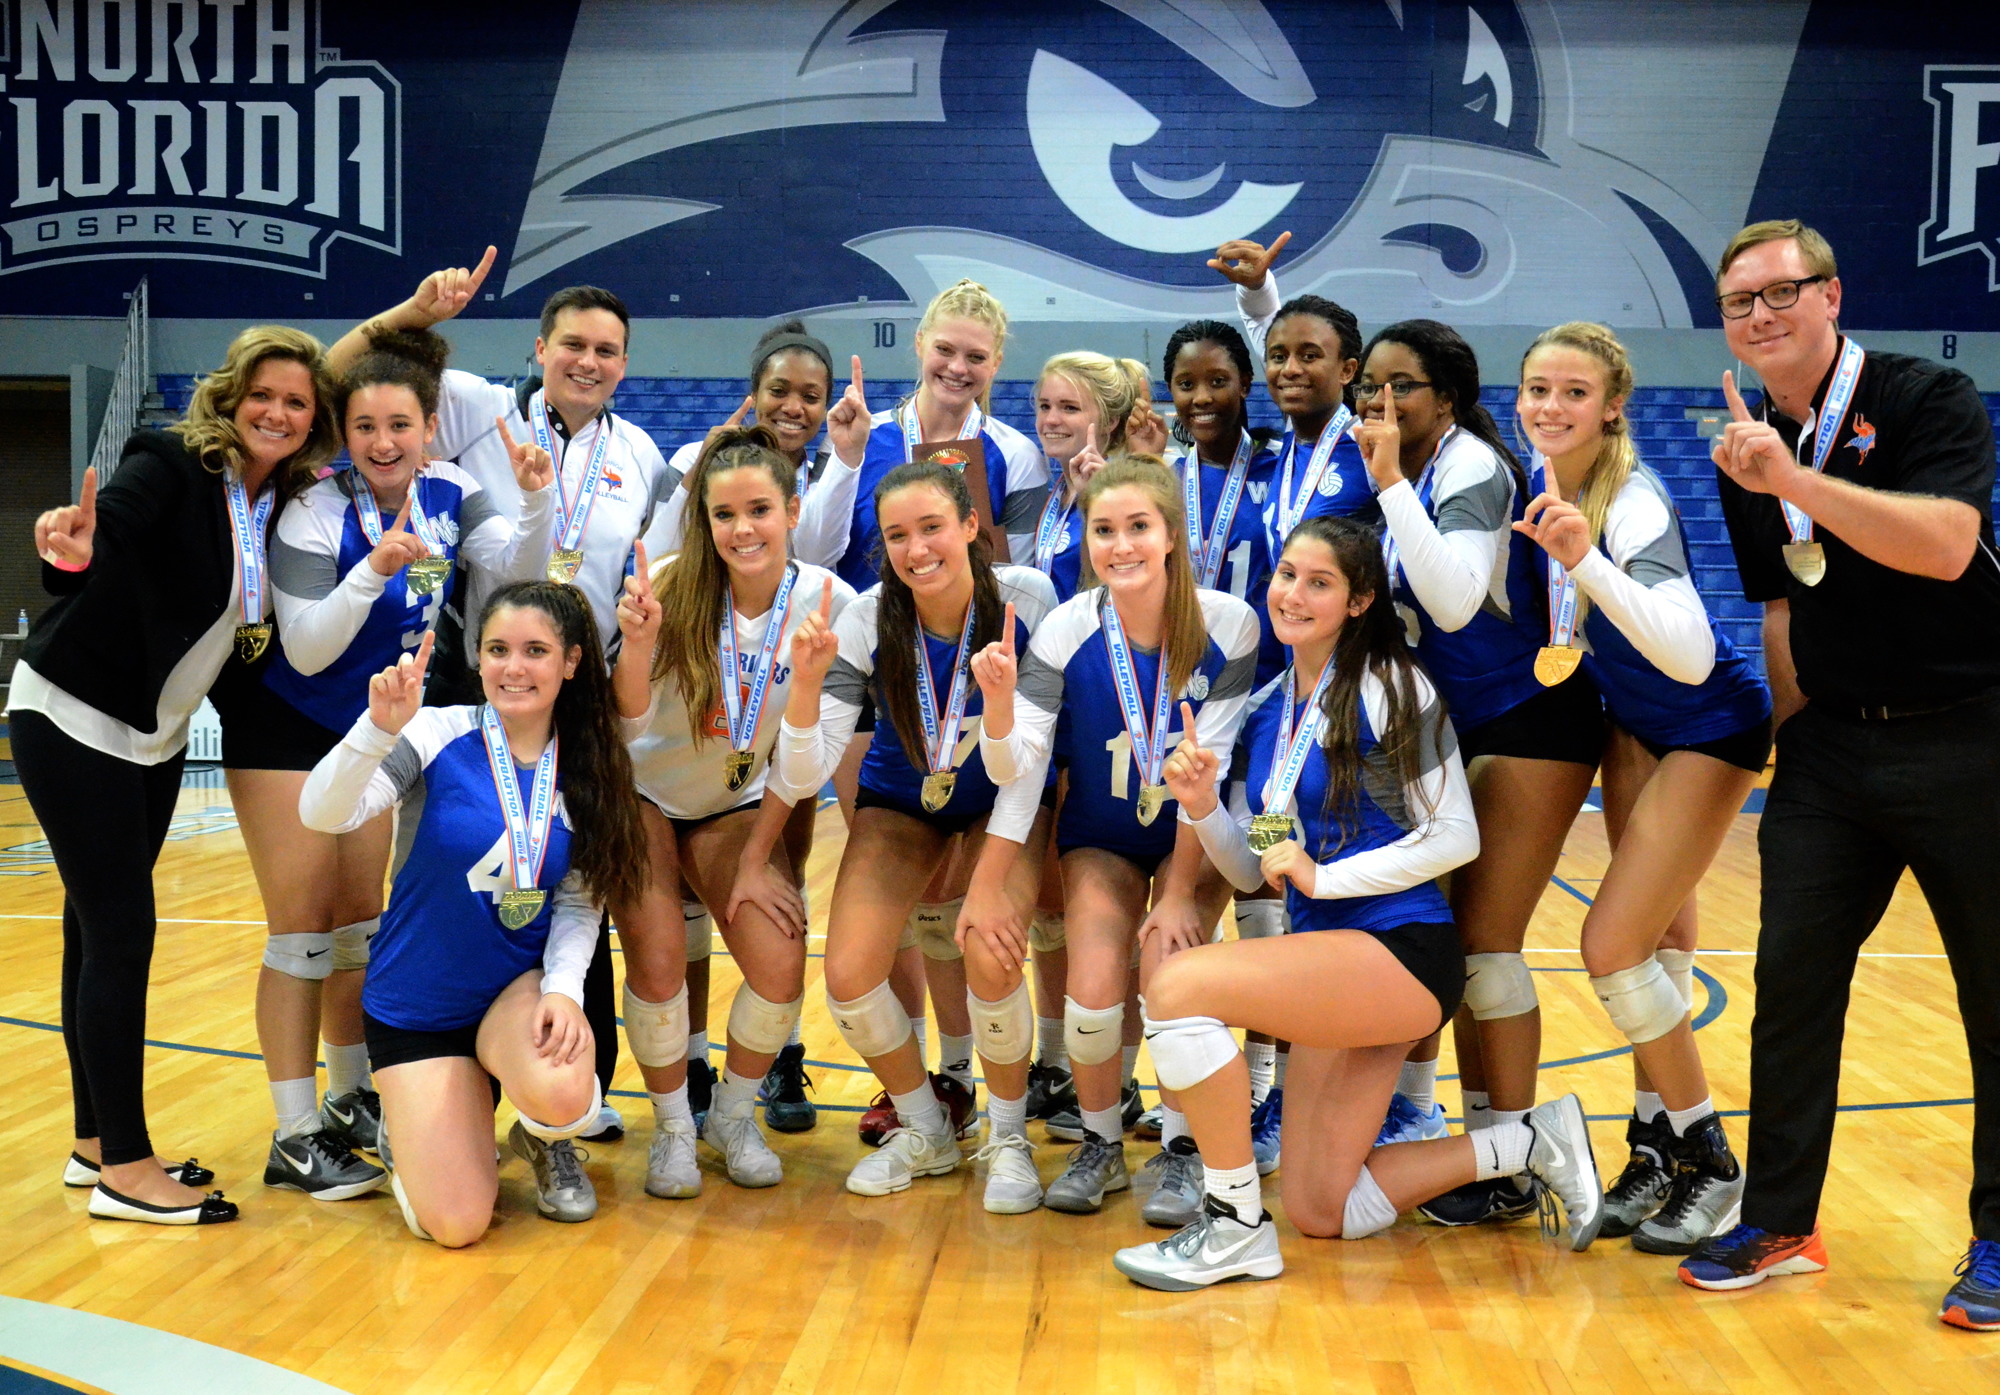 The West Orange girls volleyball team won the FHSAA Class 9A State Championship in the fall of 2017.